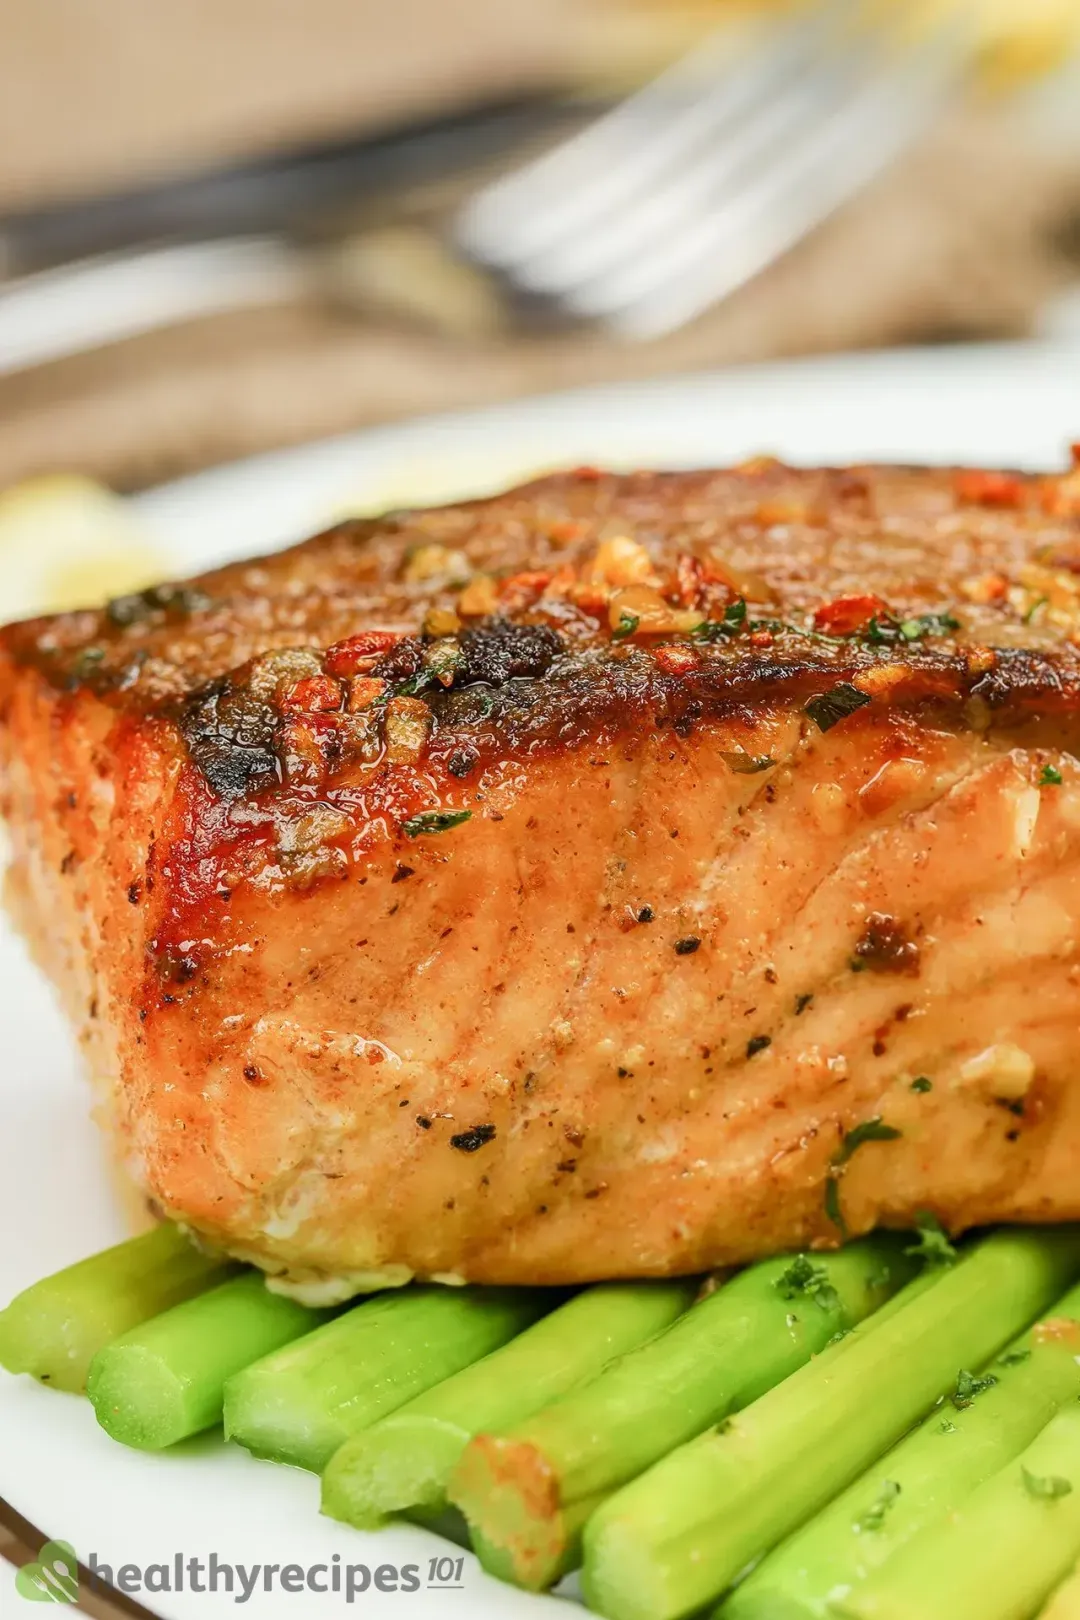 A close-up shot of a pan-seared salmon fillet with charred edges and pale orange meat laid on top of asparagus stalks